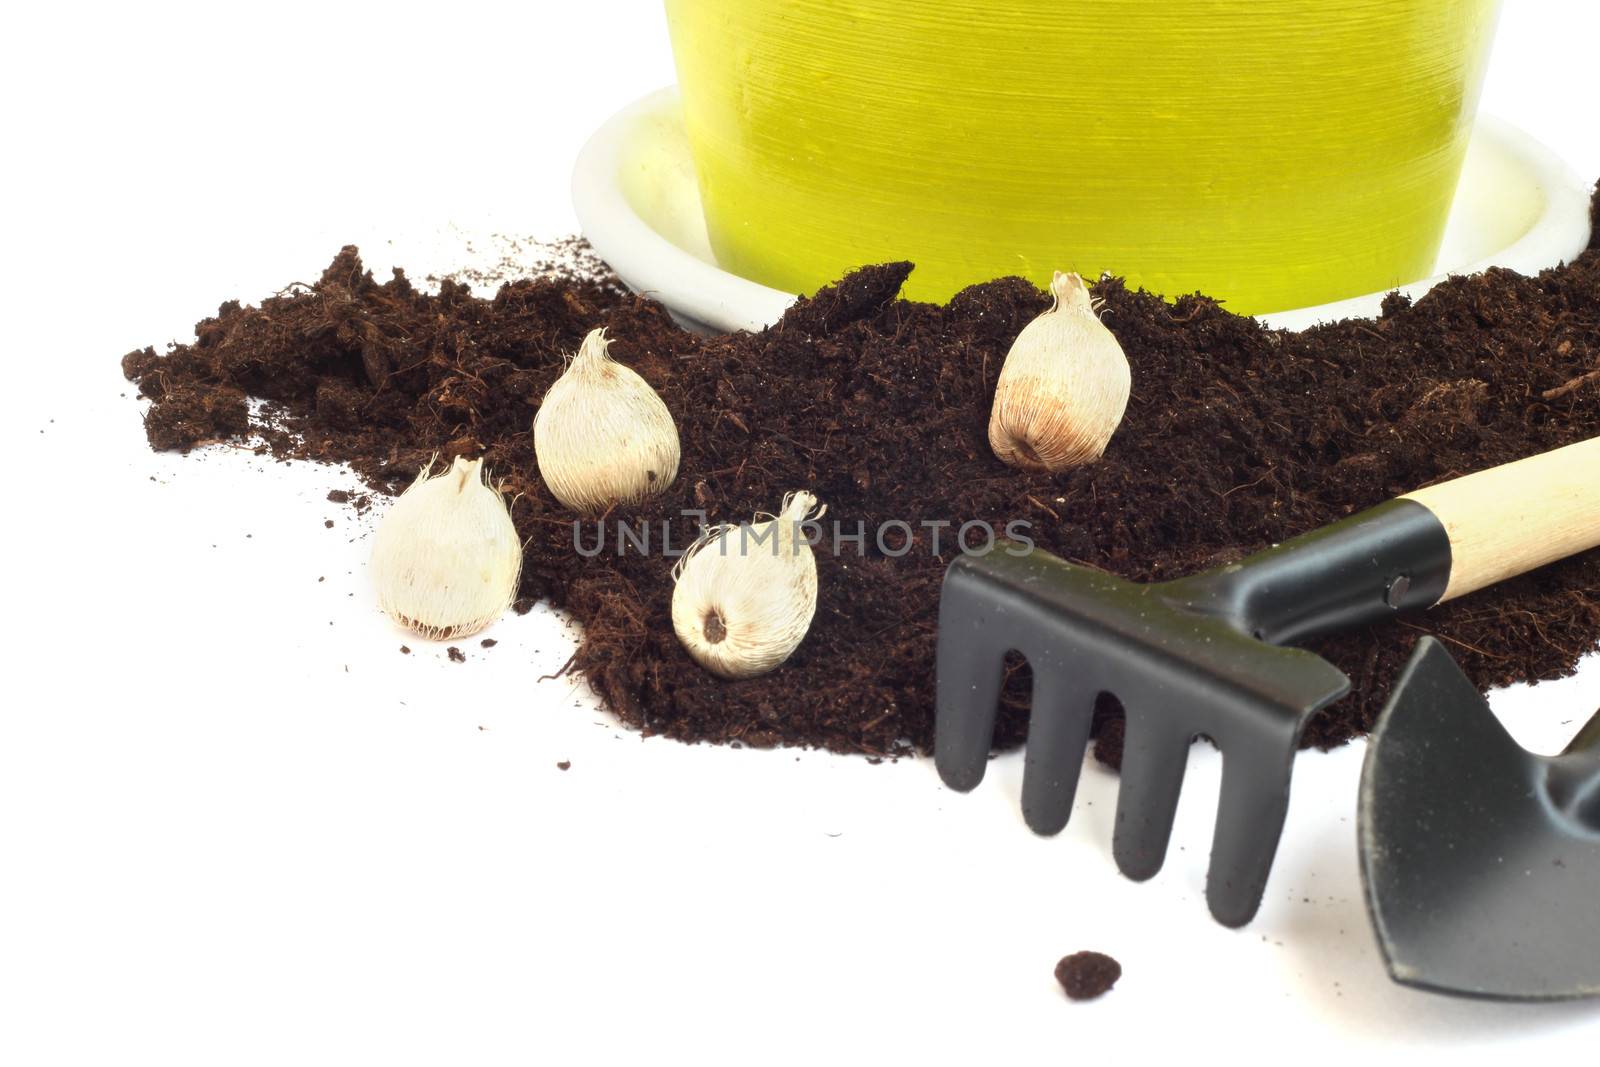 Gardening tools, flower bulbs and pot  isolated on white